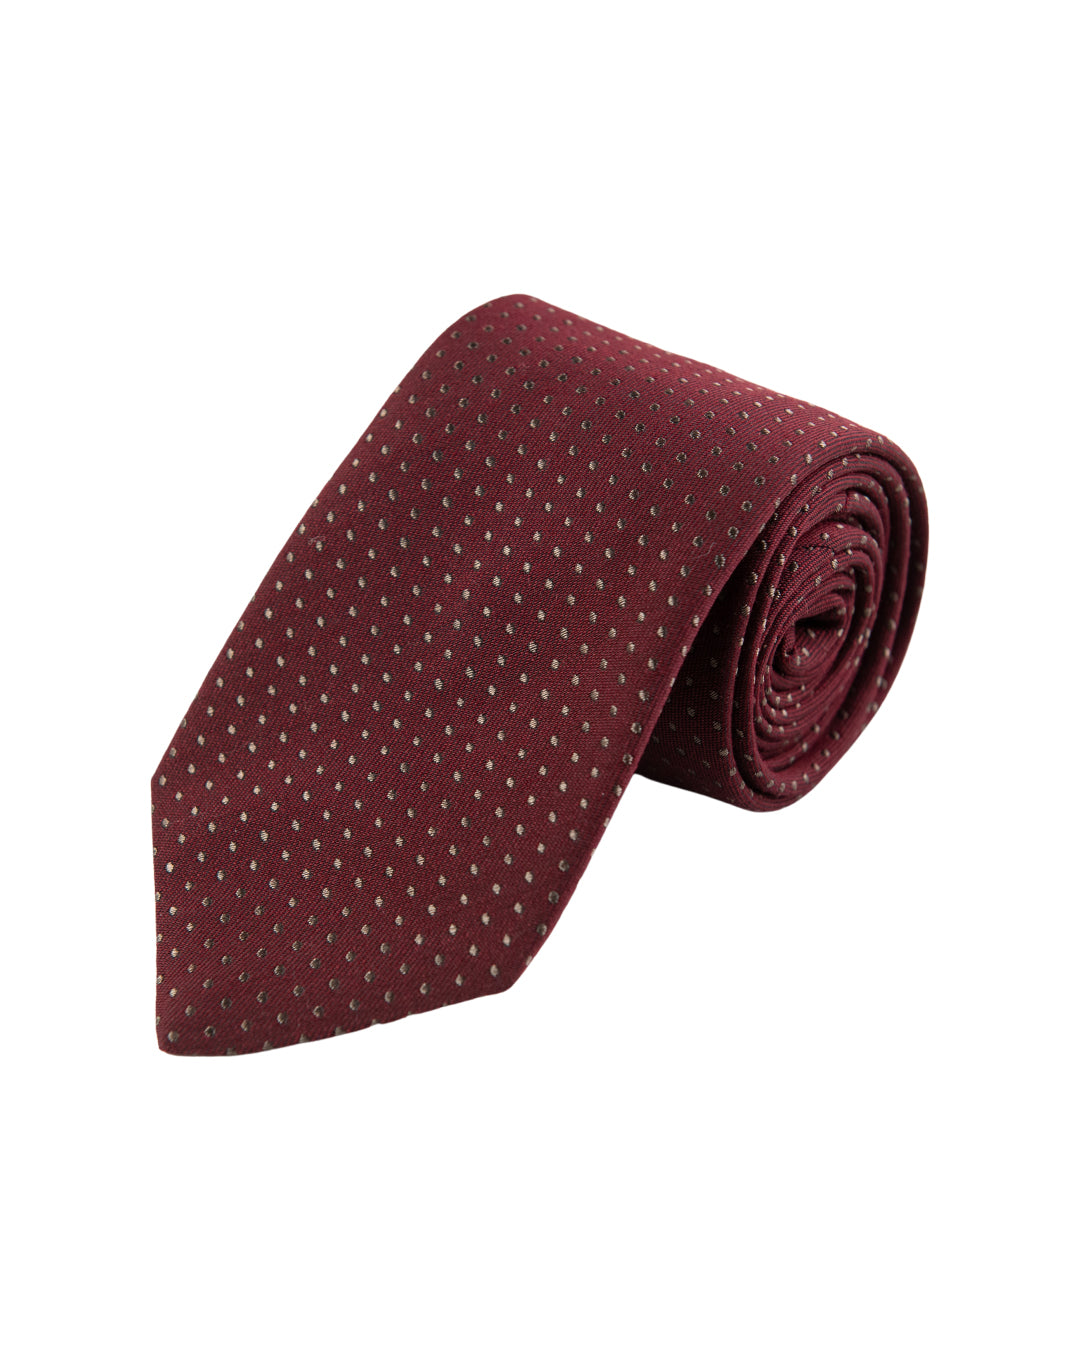 Burgundy Wool Tie With Dots